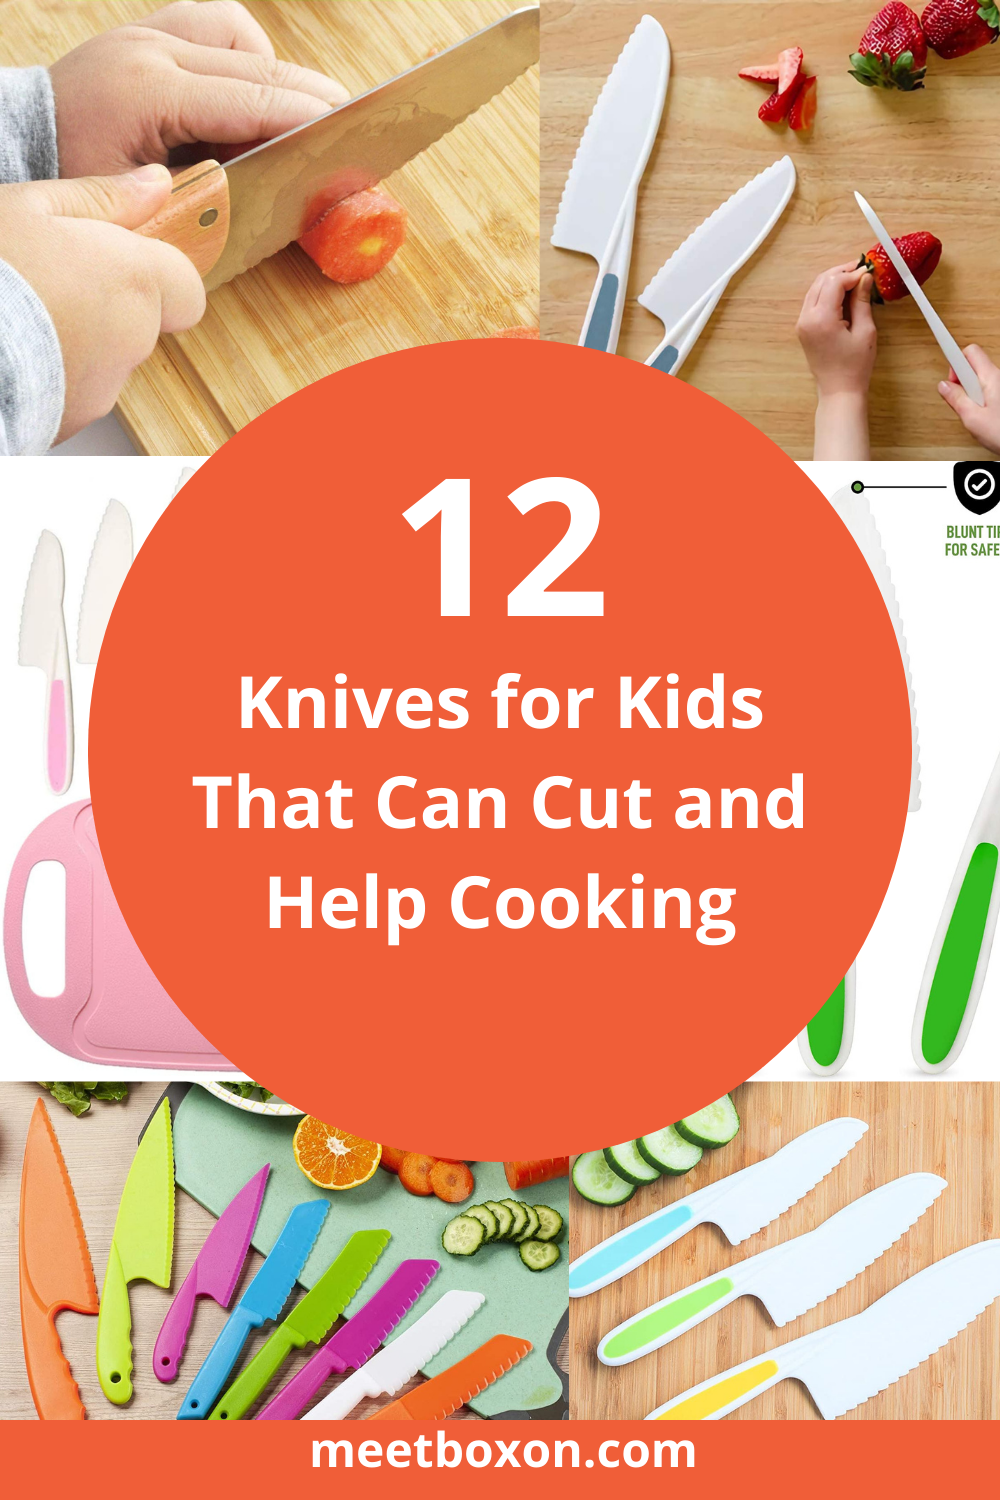 12 Knives for Kids That Can Cut and Help Cooking